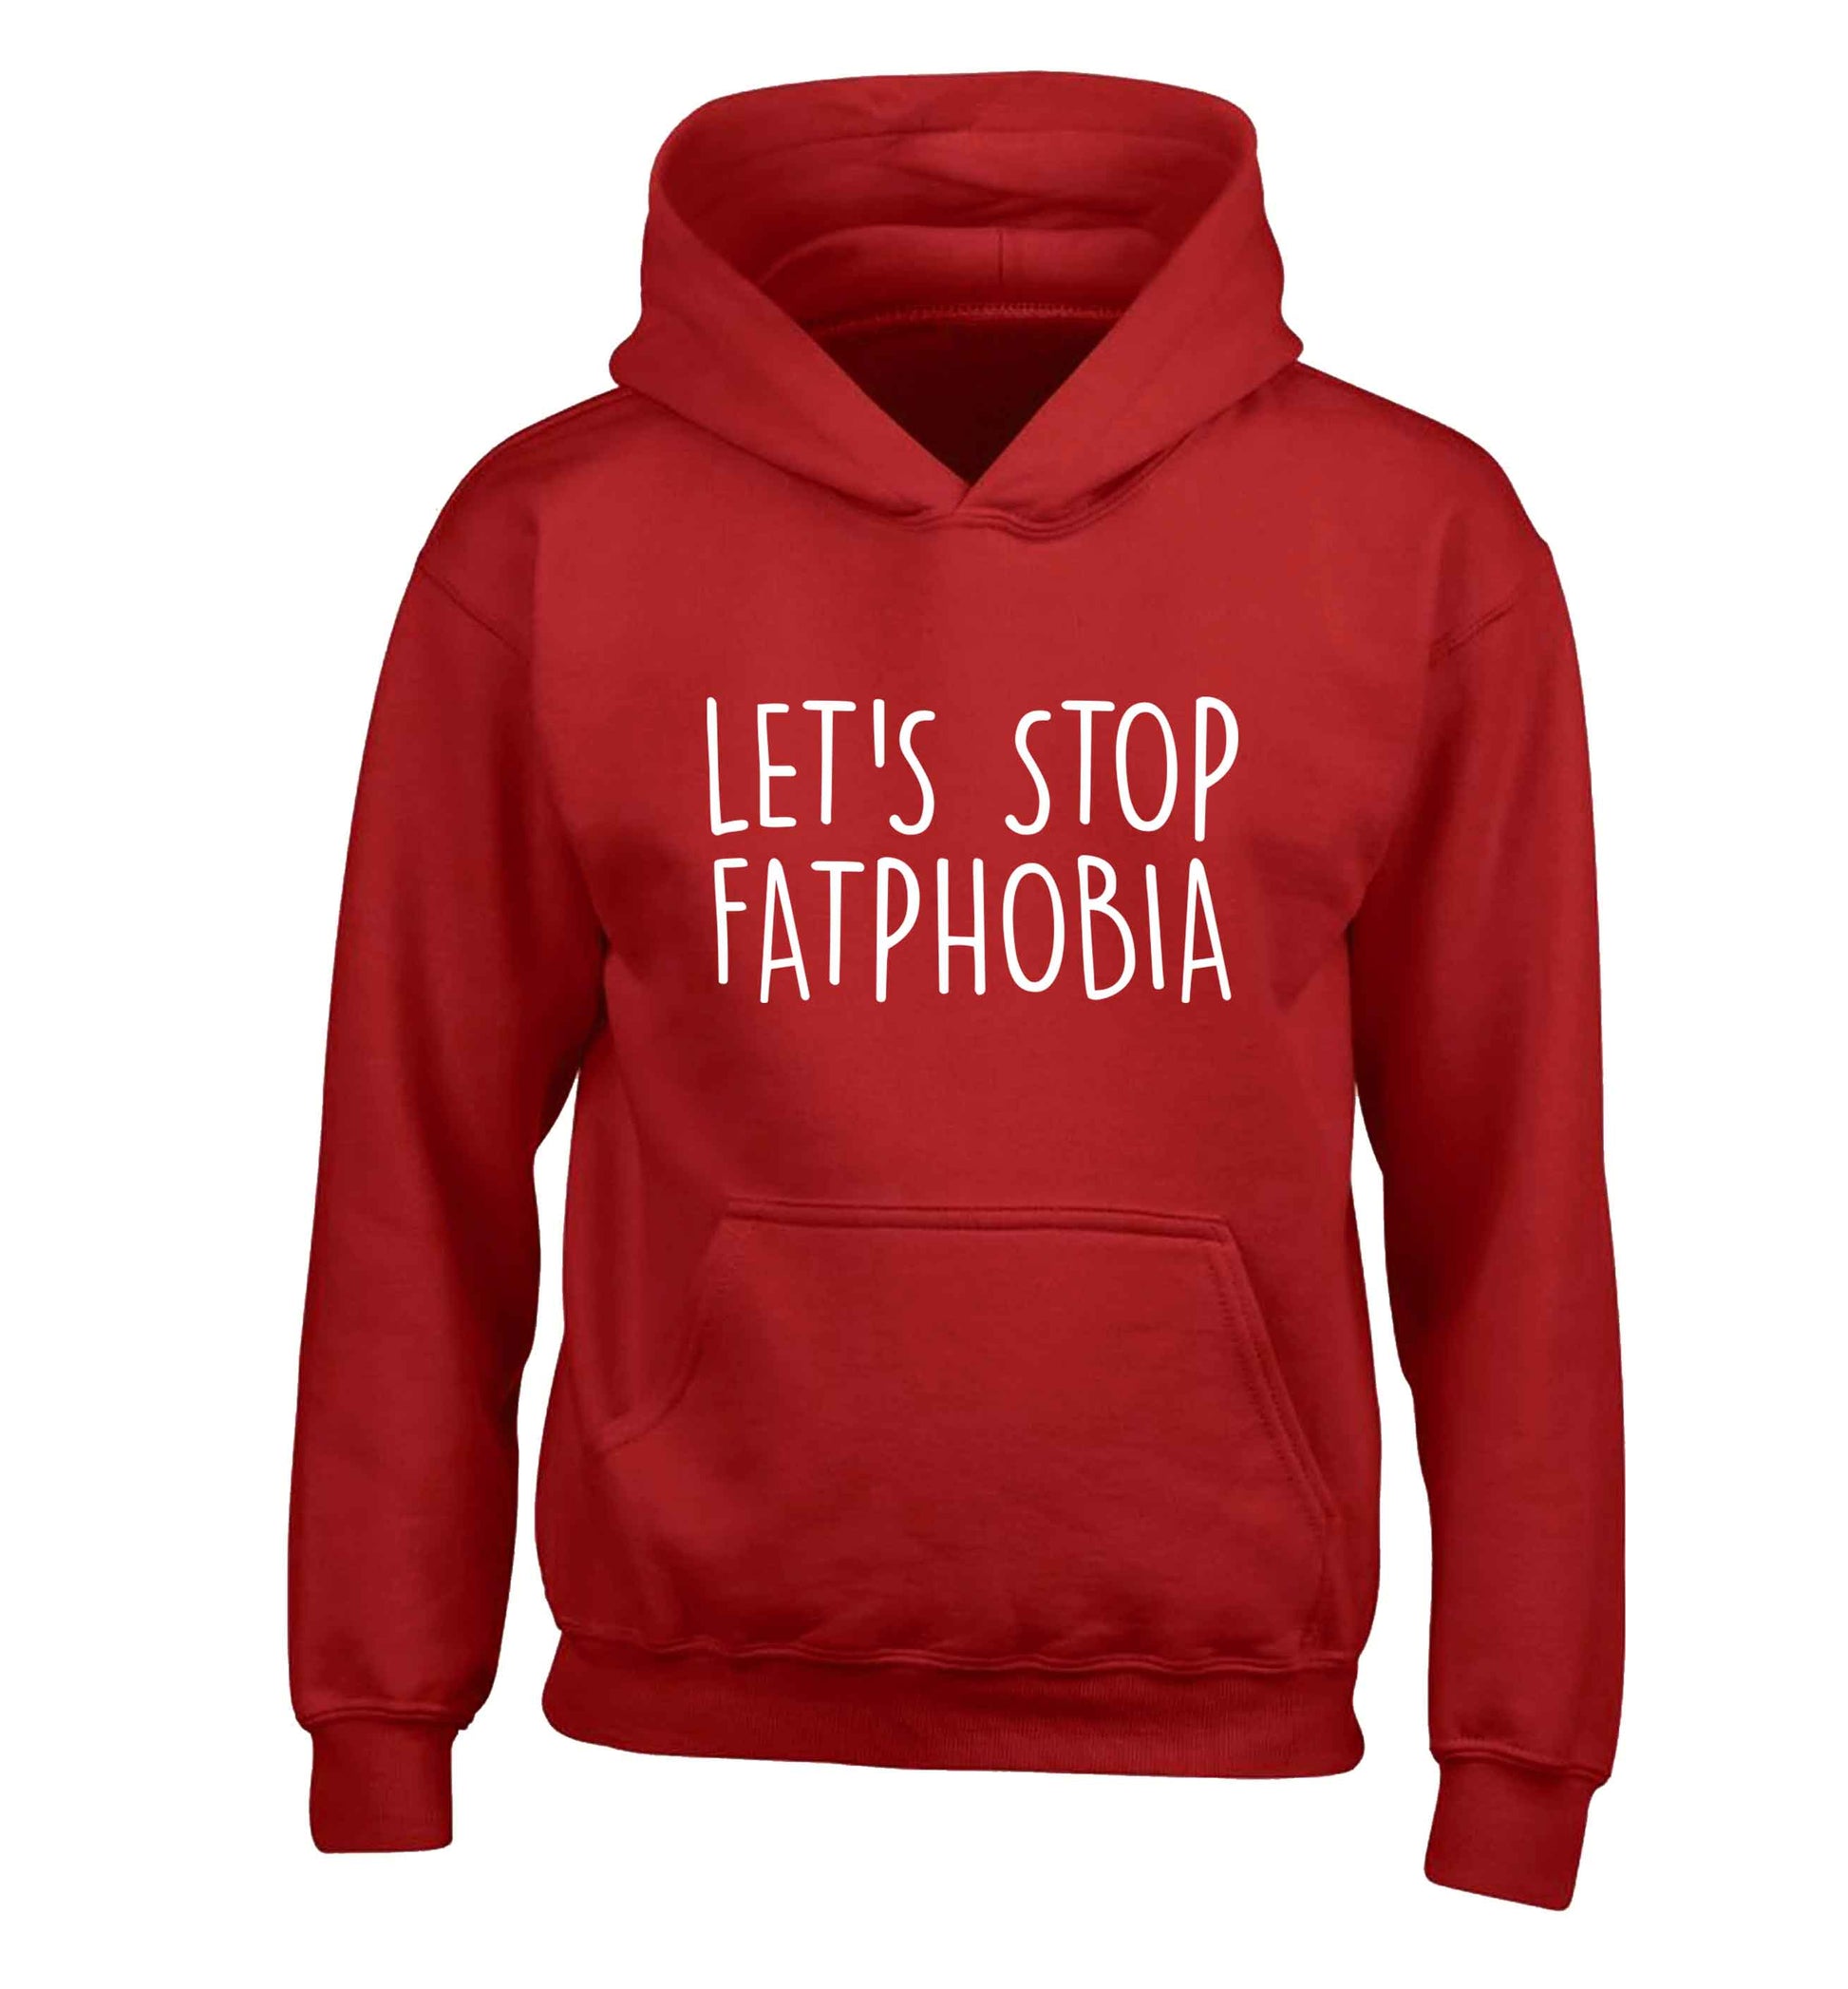 Let's stop fatphobia children's red hoodie 12-13 Years